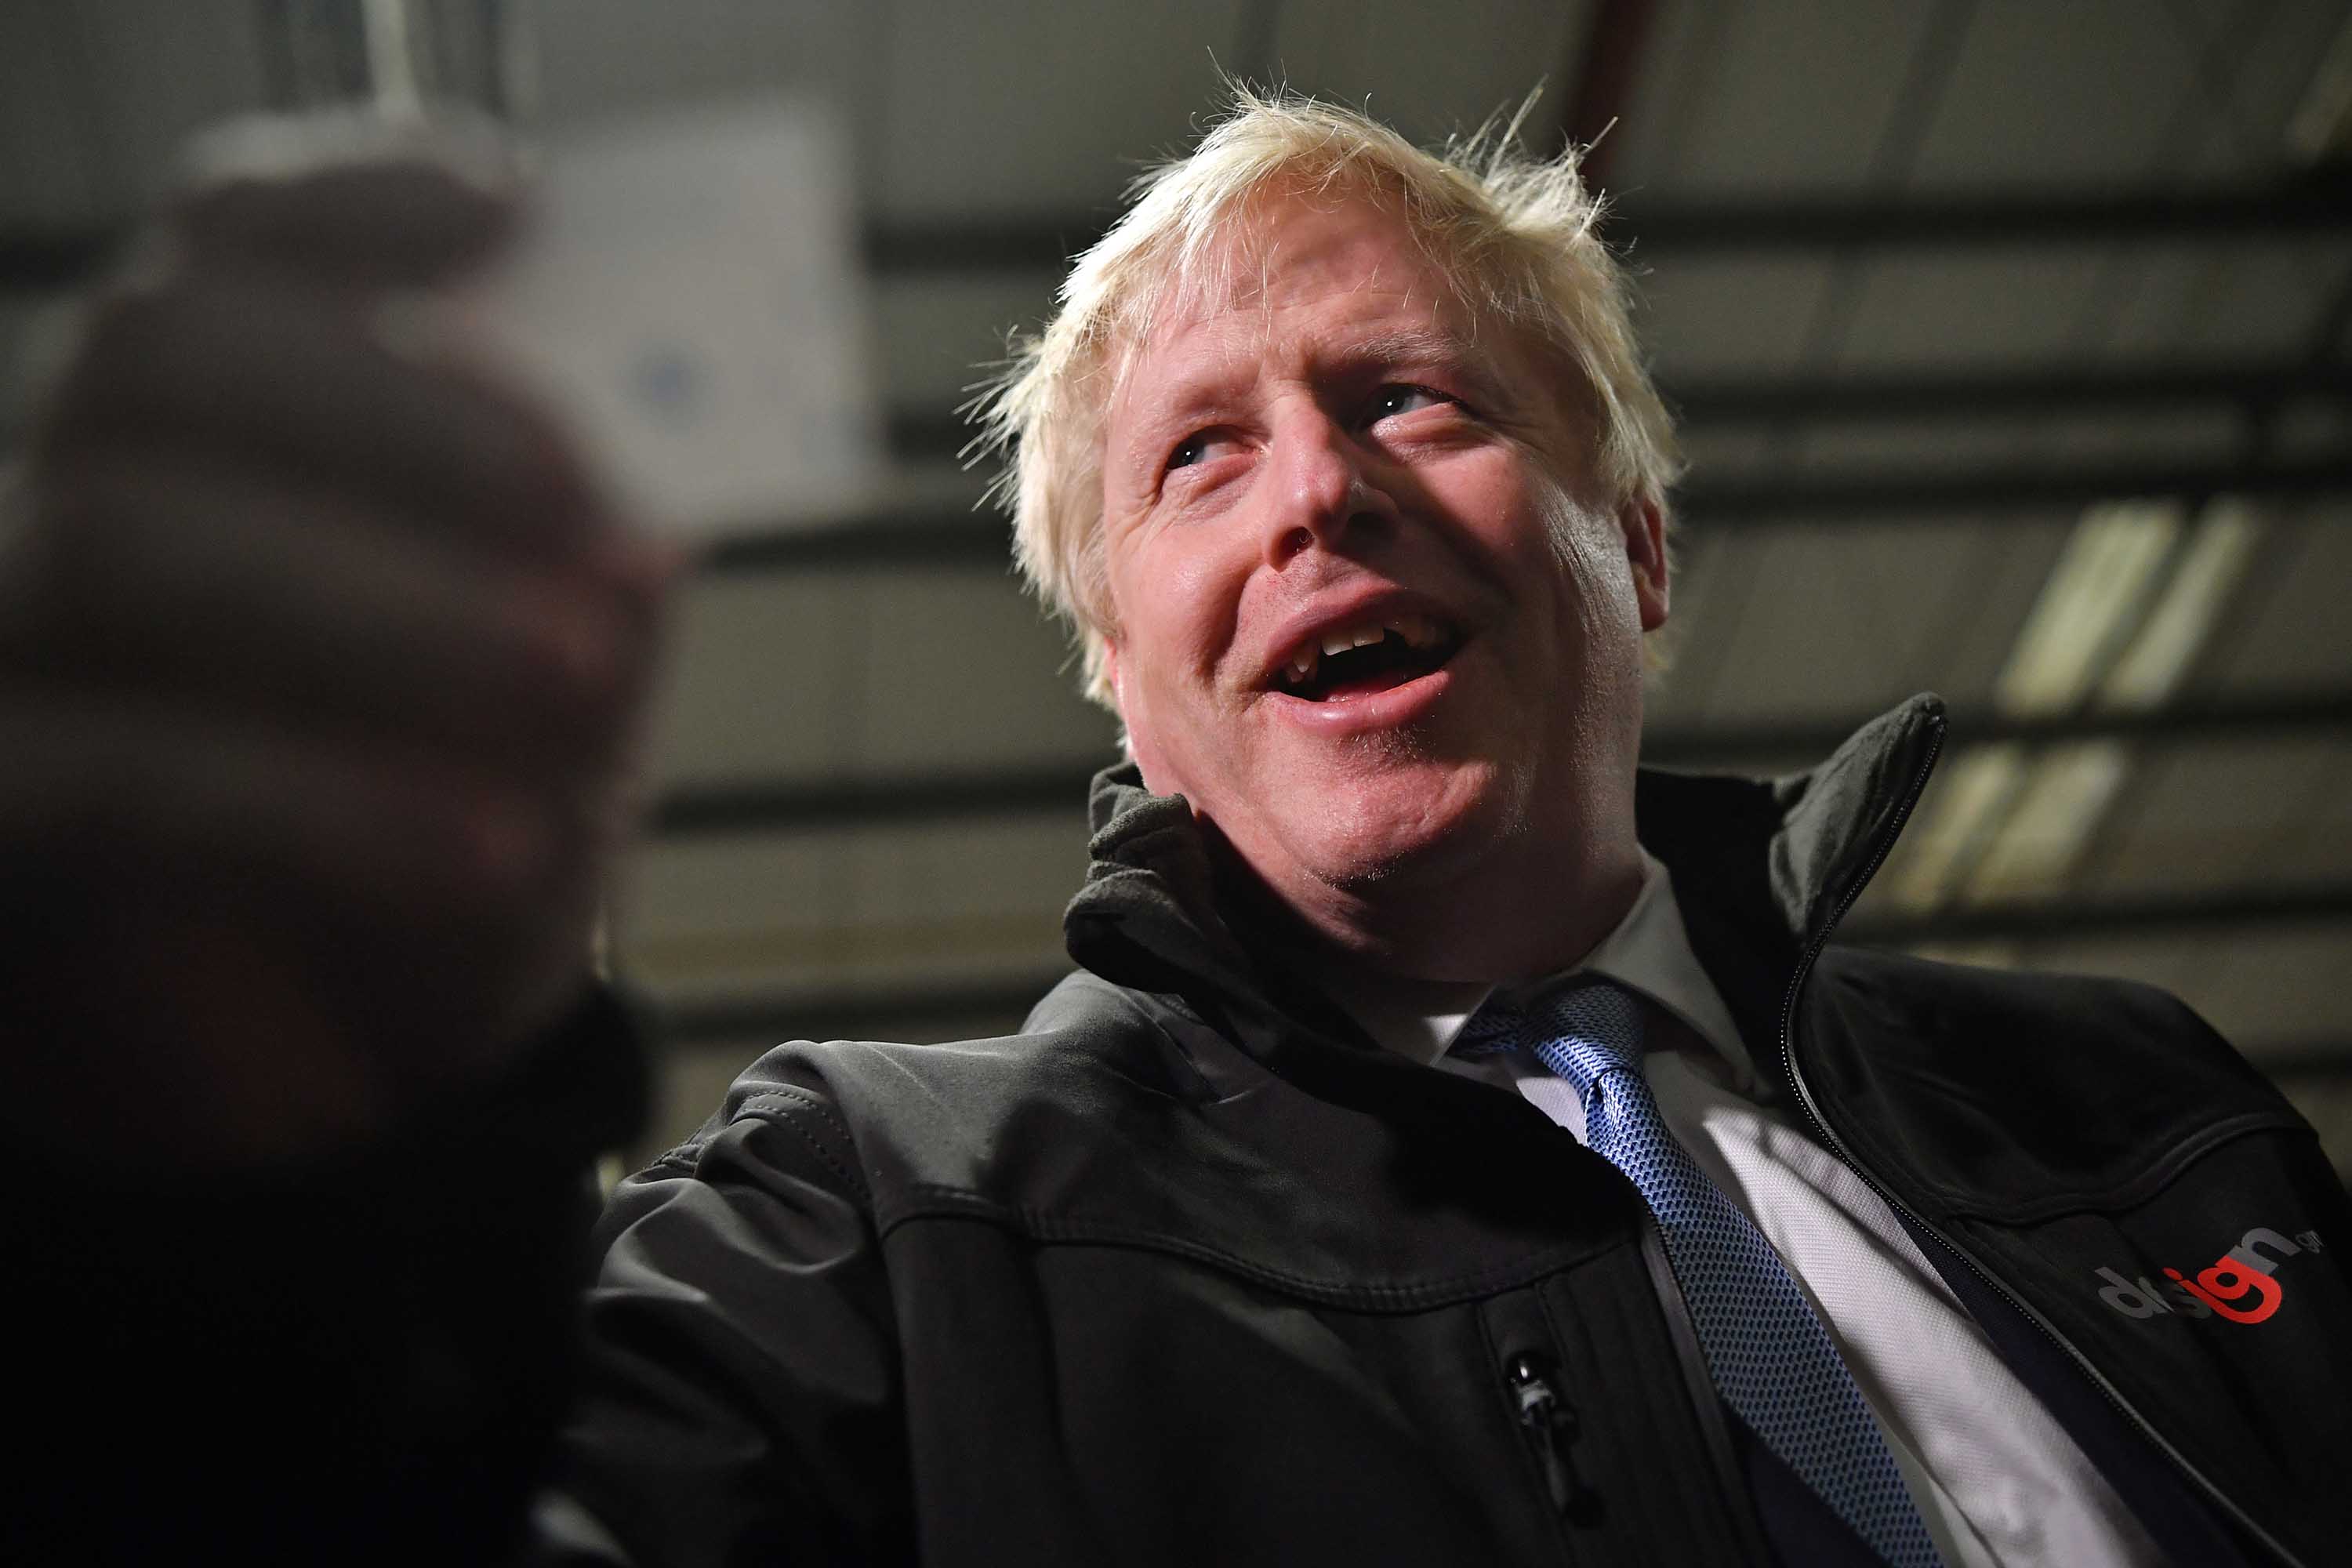 Prime Minister Johnson is seen on the final day of campaigning on December 11 in Hengoed, South Wales. Photo: Ben Stansall/WPA Pool/Getty Images